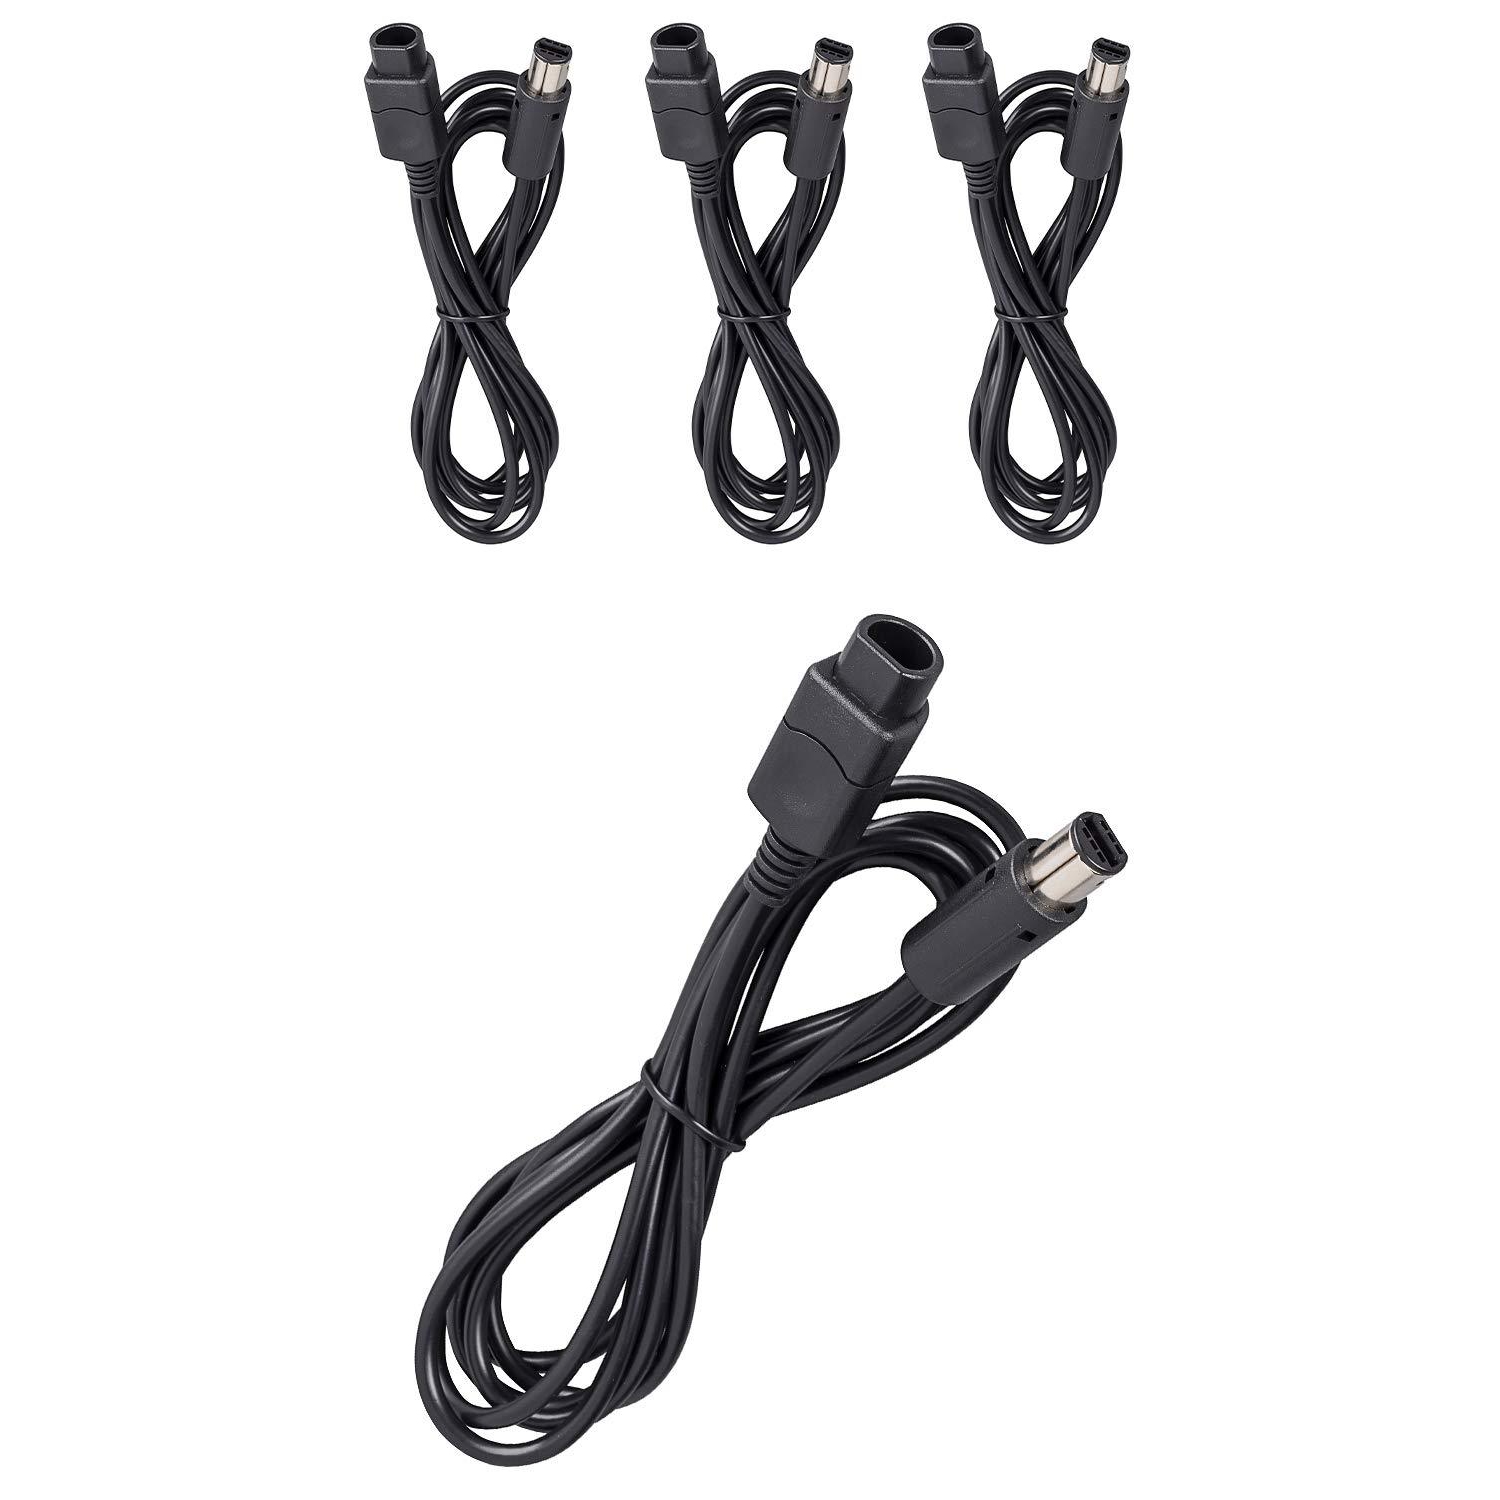 4 Pack Extension Cable Bundle for Nintendo Gamecube Controllers Switch Wii Classic Extender by EVORETRO [video game]